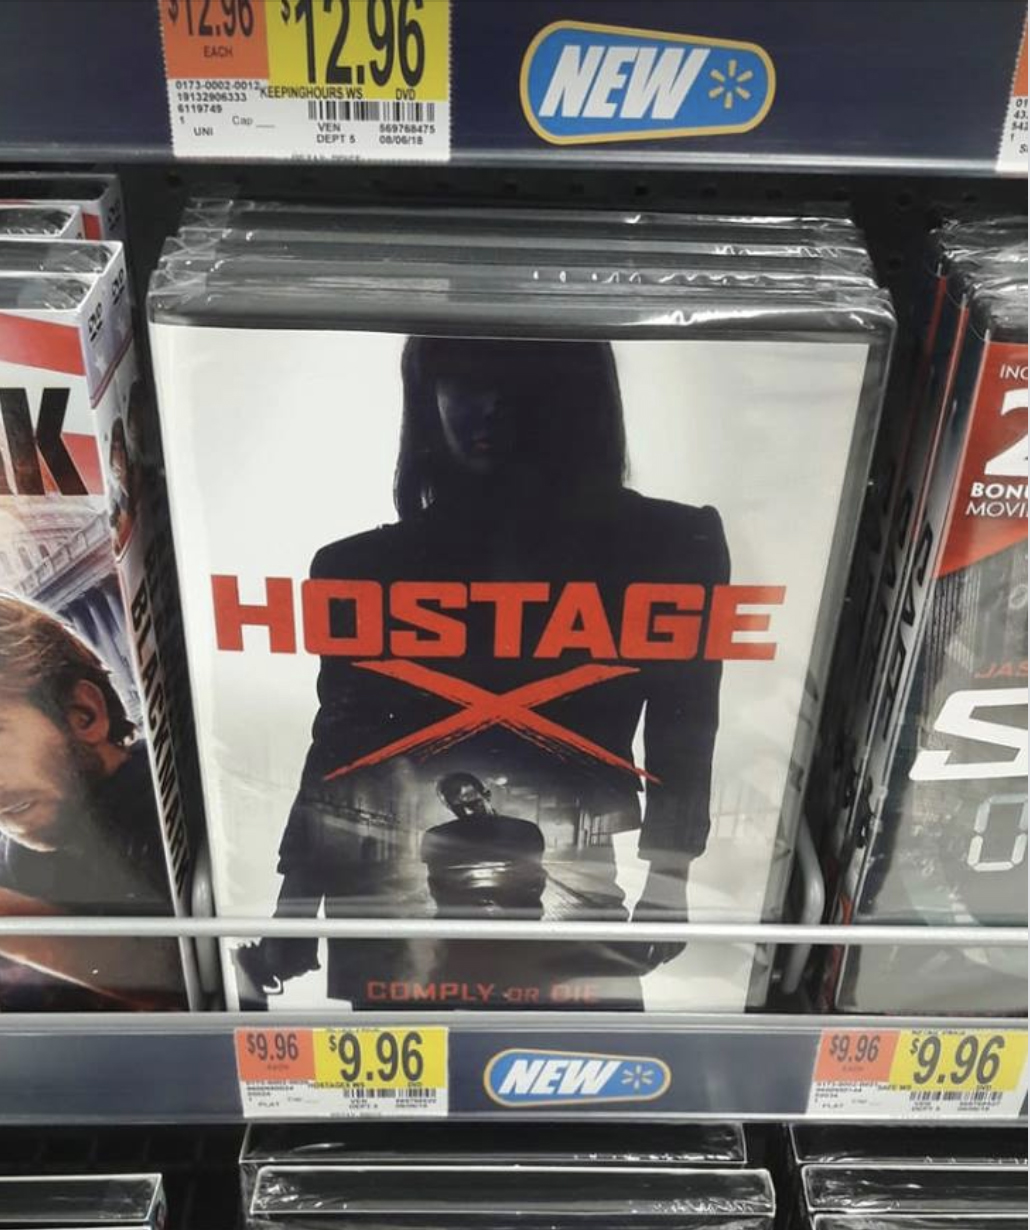 HOSTAGE X and SAFE in the USA